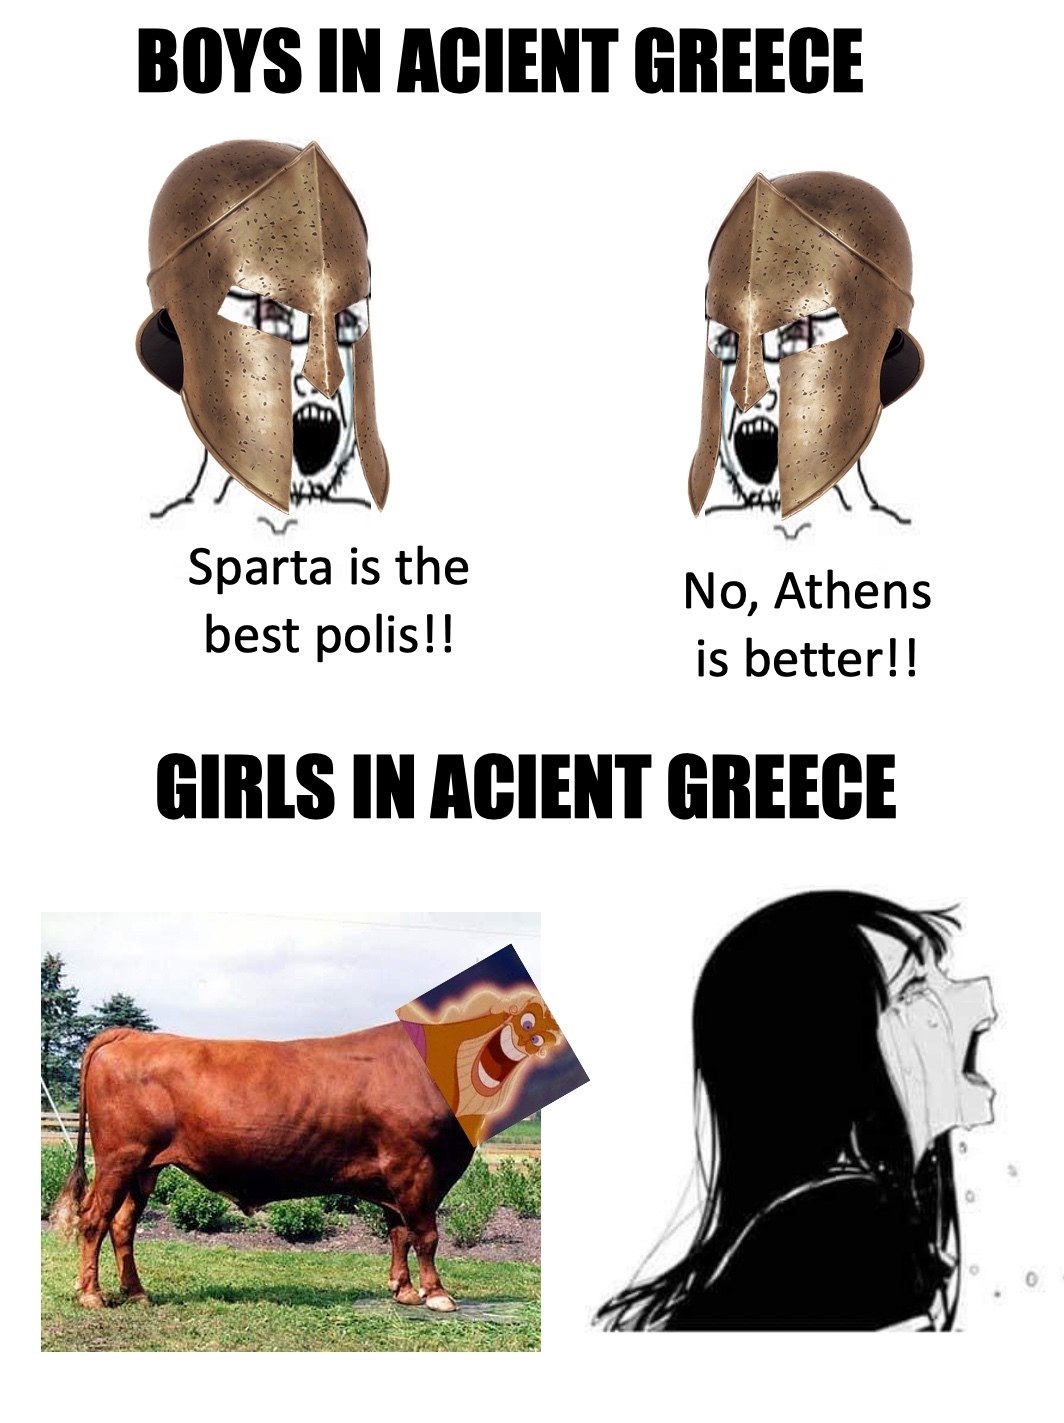 alex jones said ancient greeks got breeded out of existence by ottomans - meme